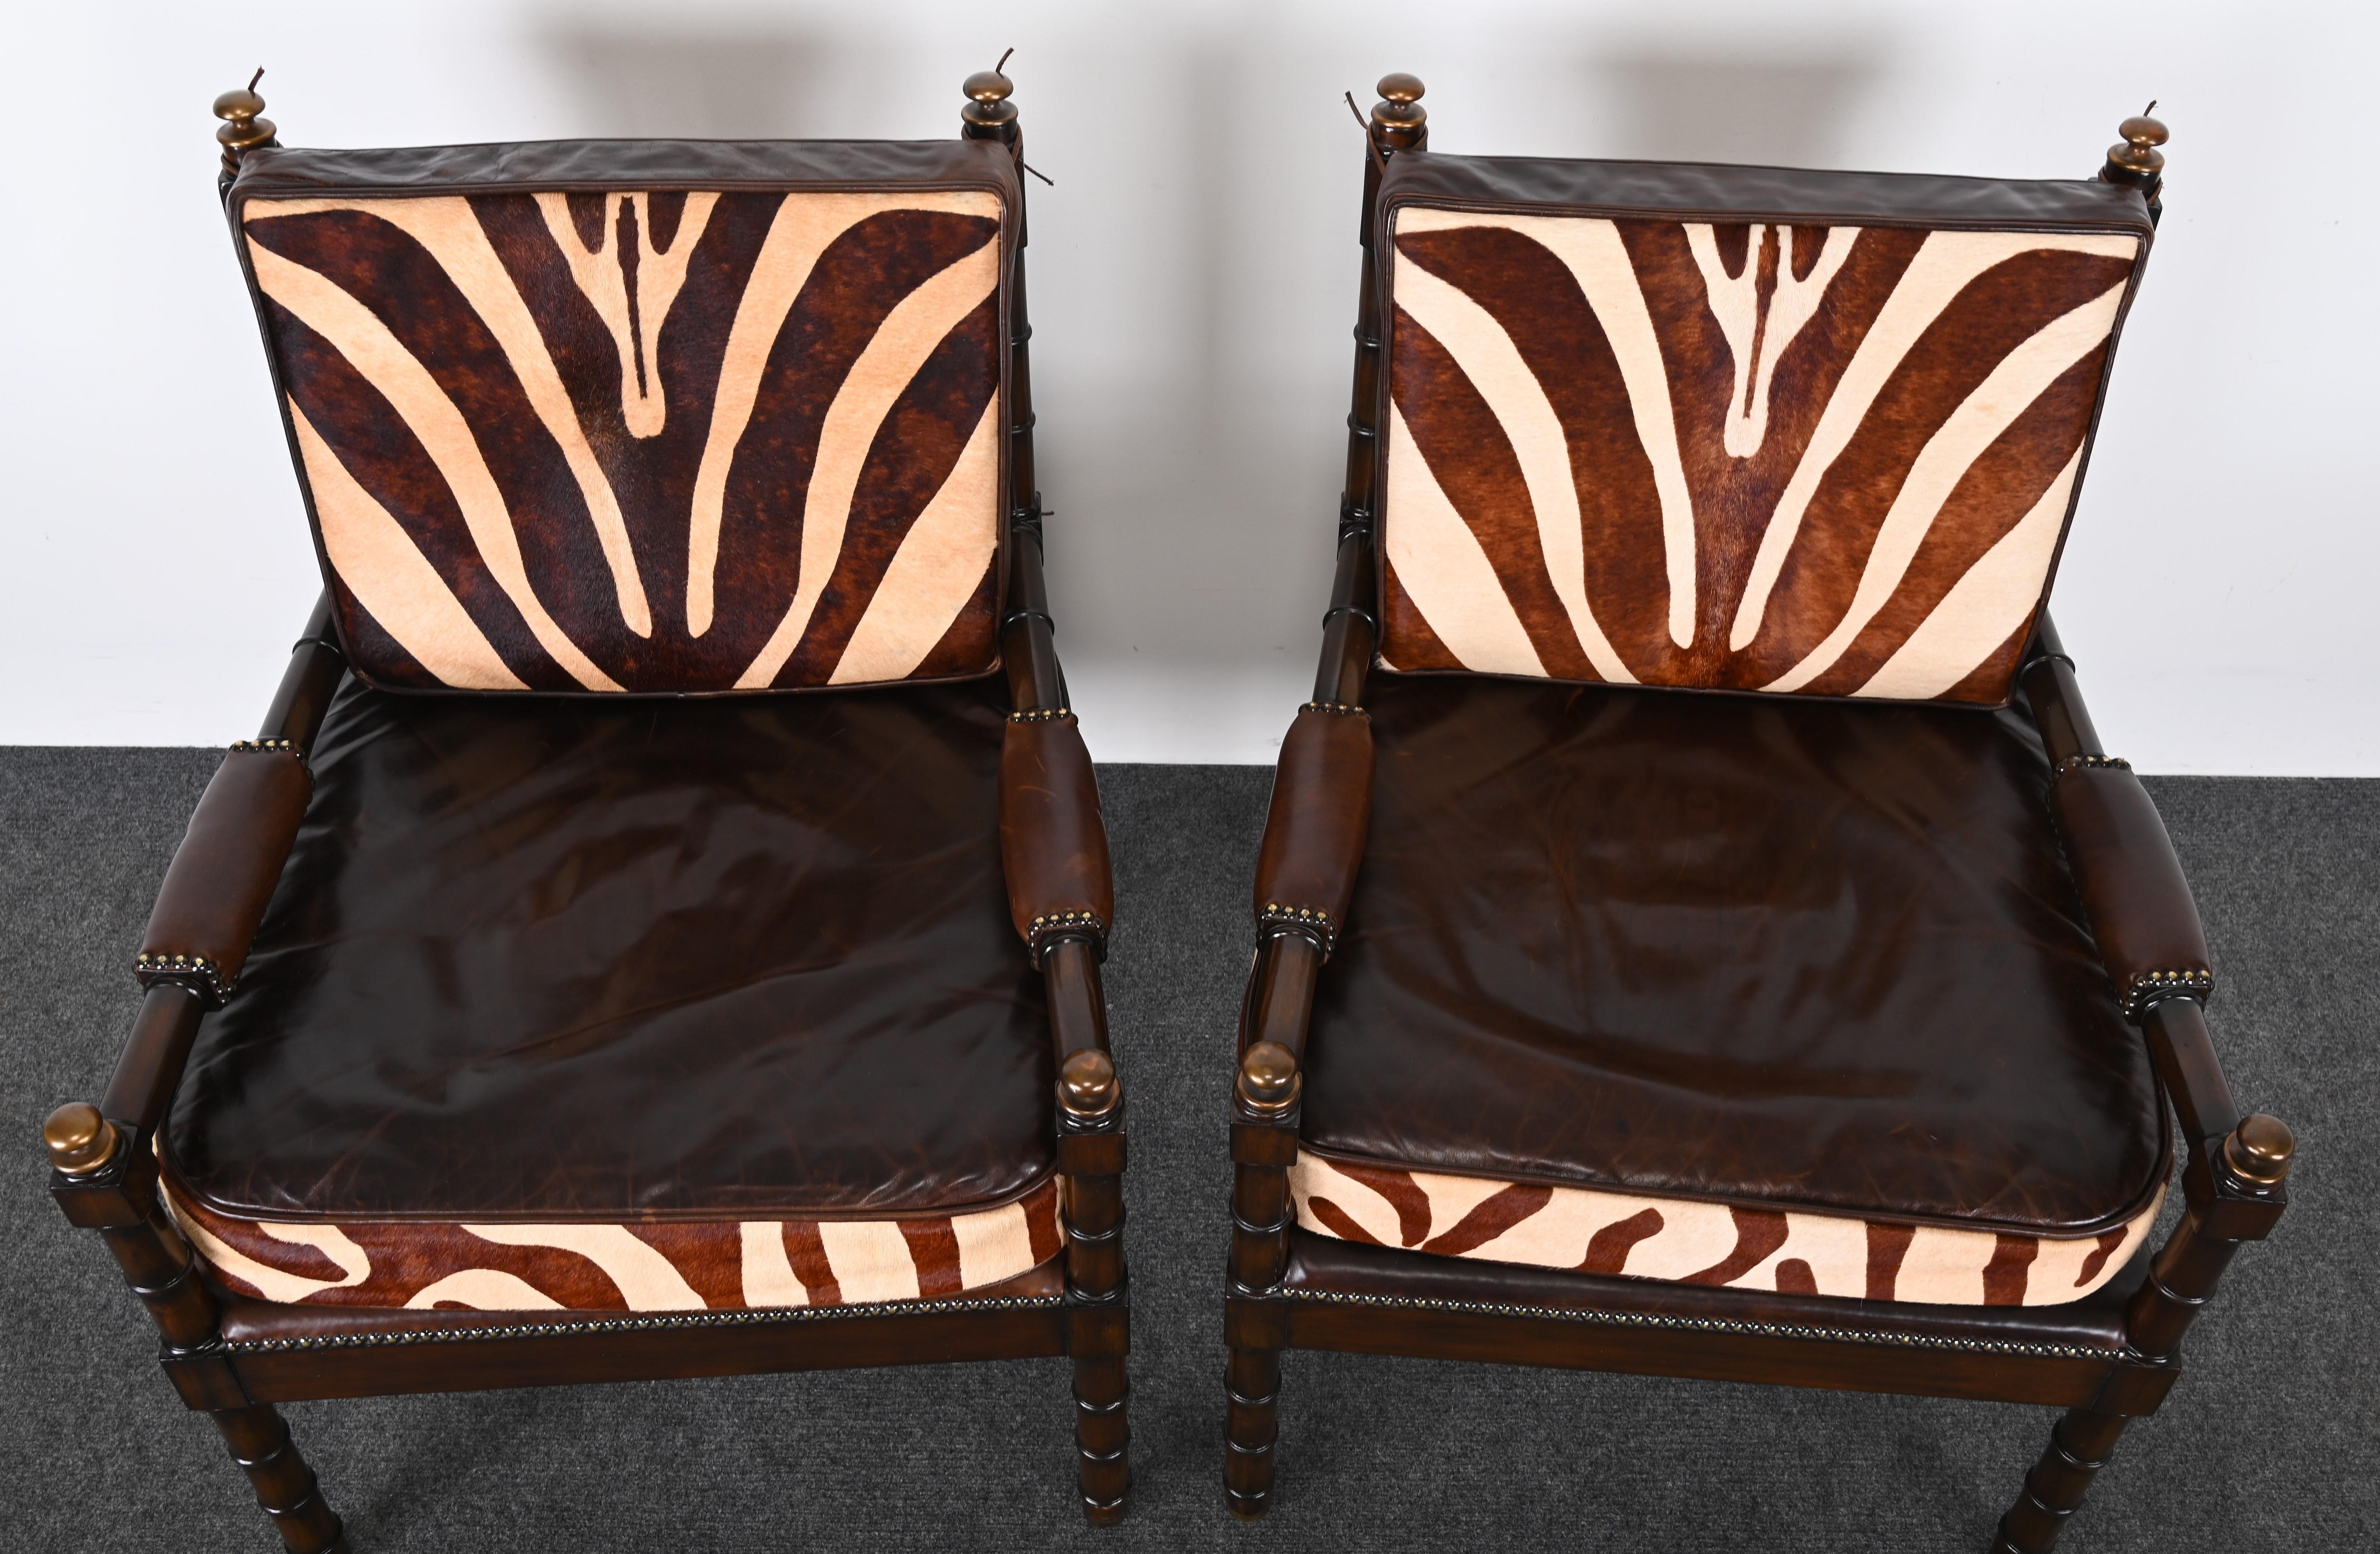 Maitland Smith Bamboo Armchairs with Cowhide Zebra Print Leather Seats, 1990s For Sale 2